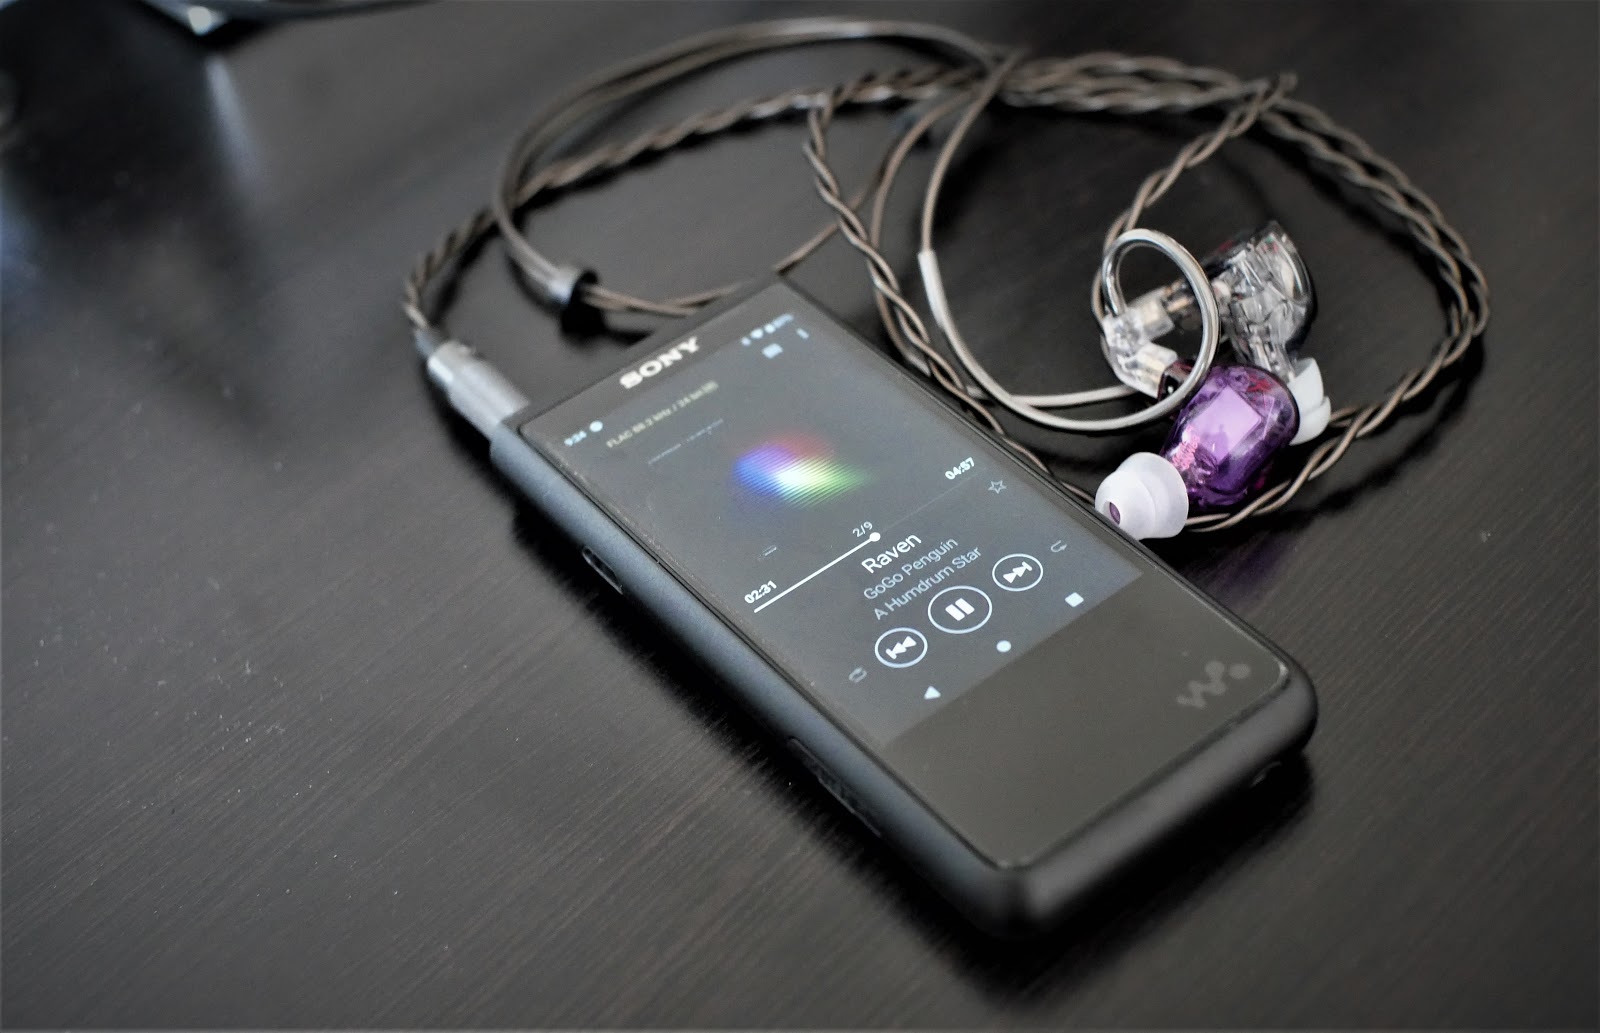 Sony NW-A100 and NW-ZX500 Walkman Audio Players - #22 by antdroid 